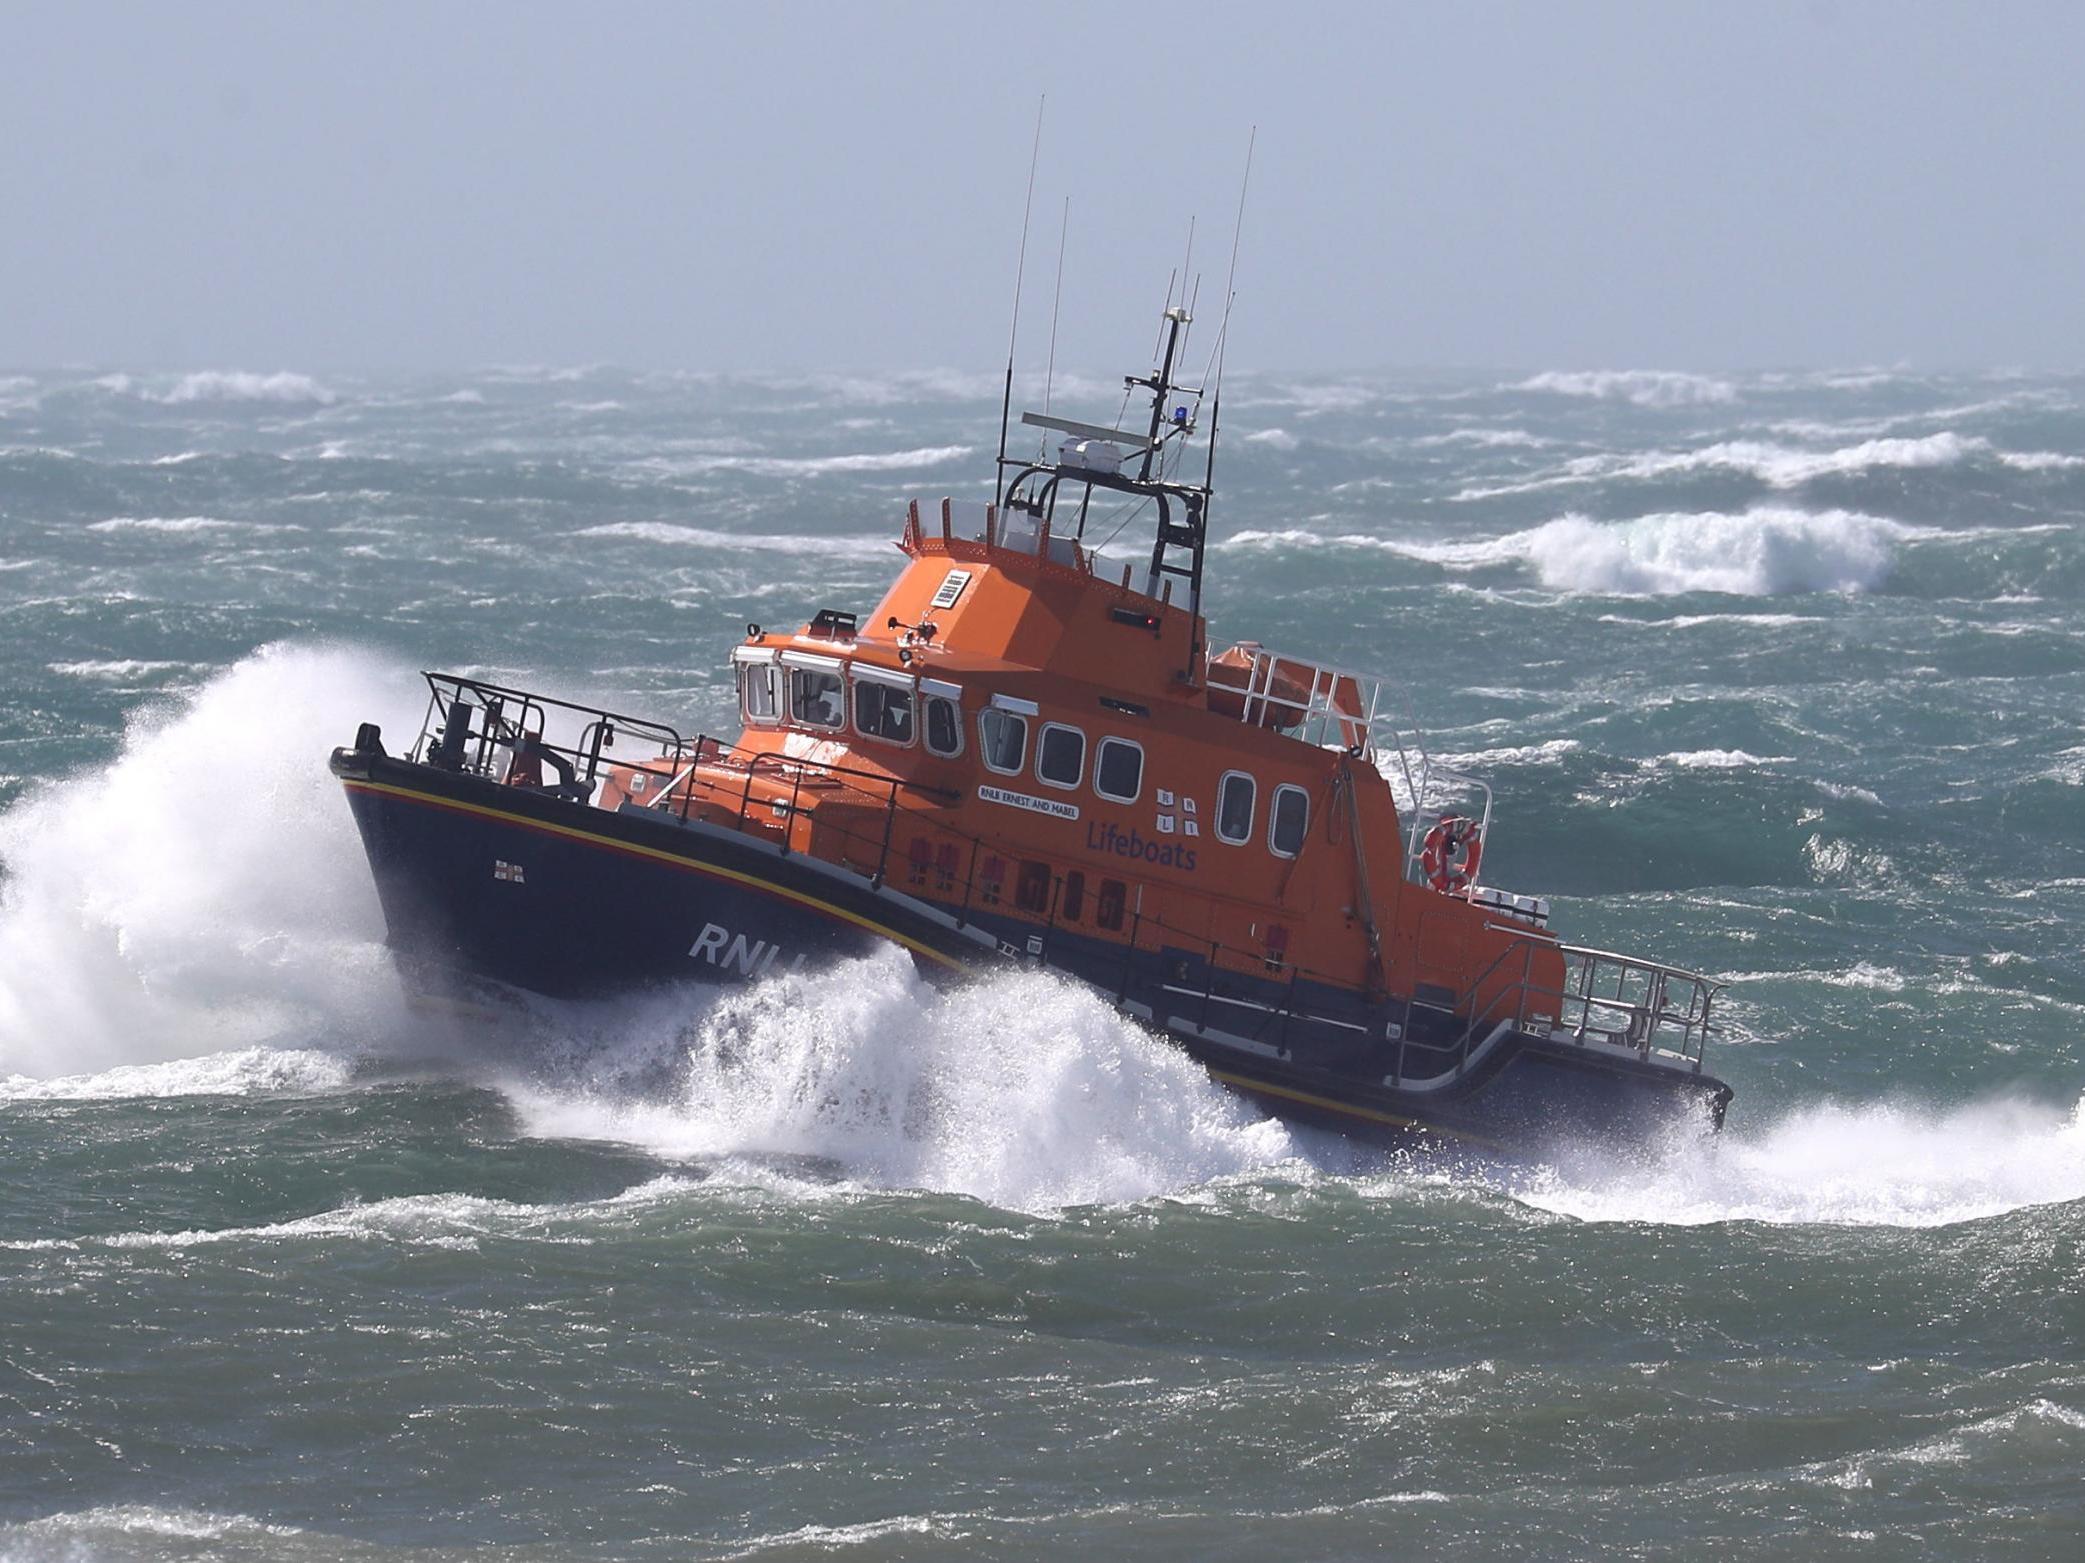 Two lifeboats and two helicopters were among the resources deployed to find the swimmer (File photo)